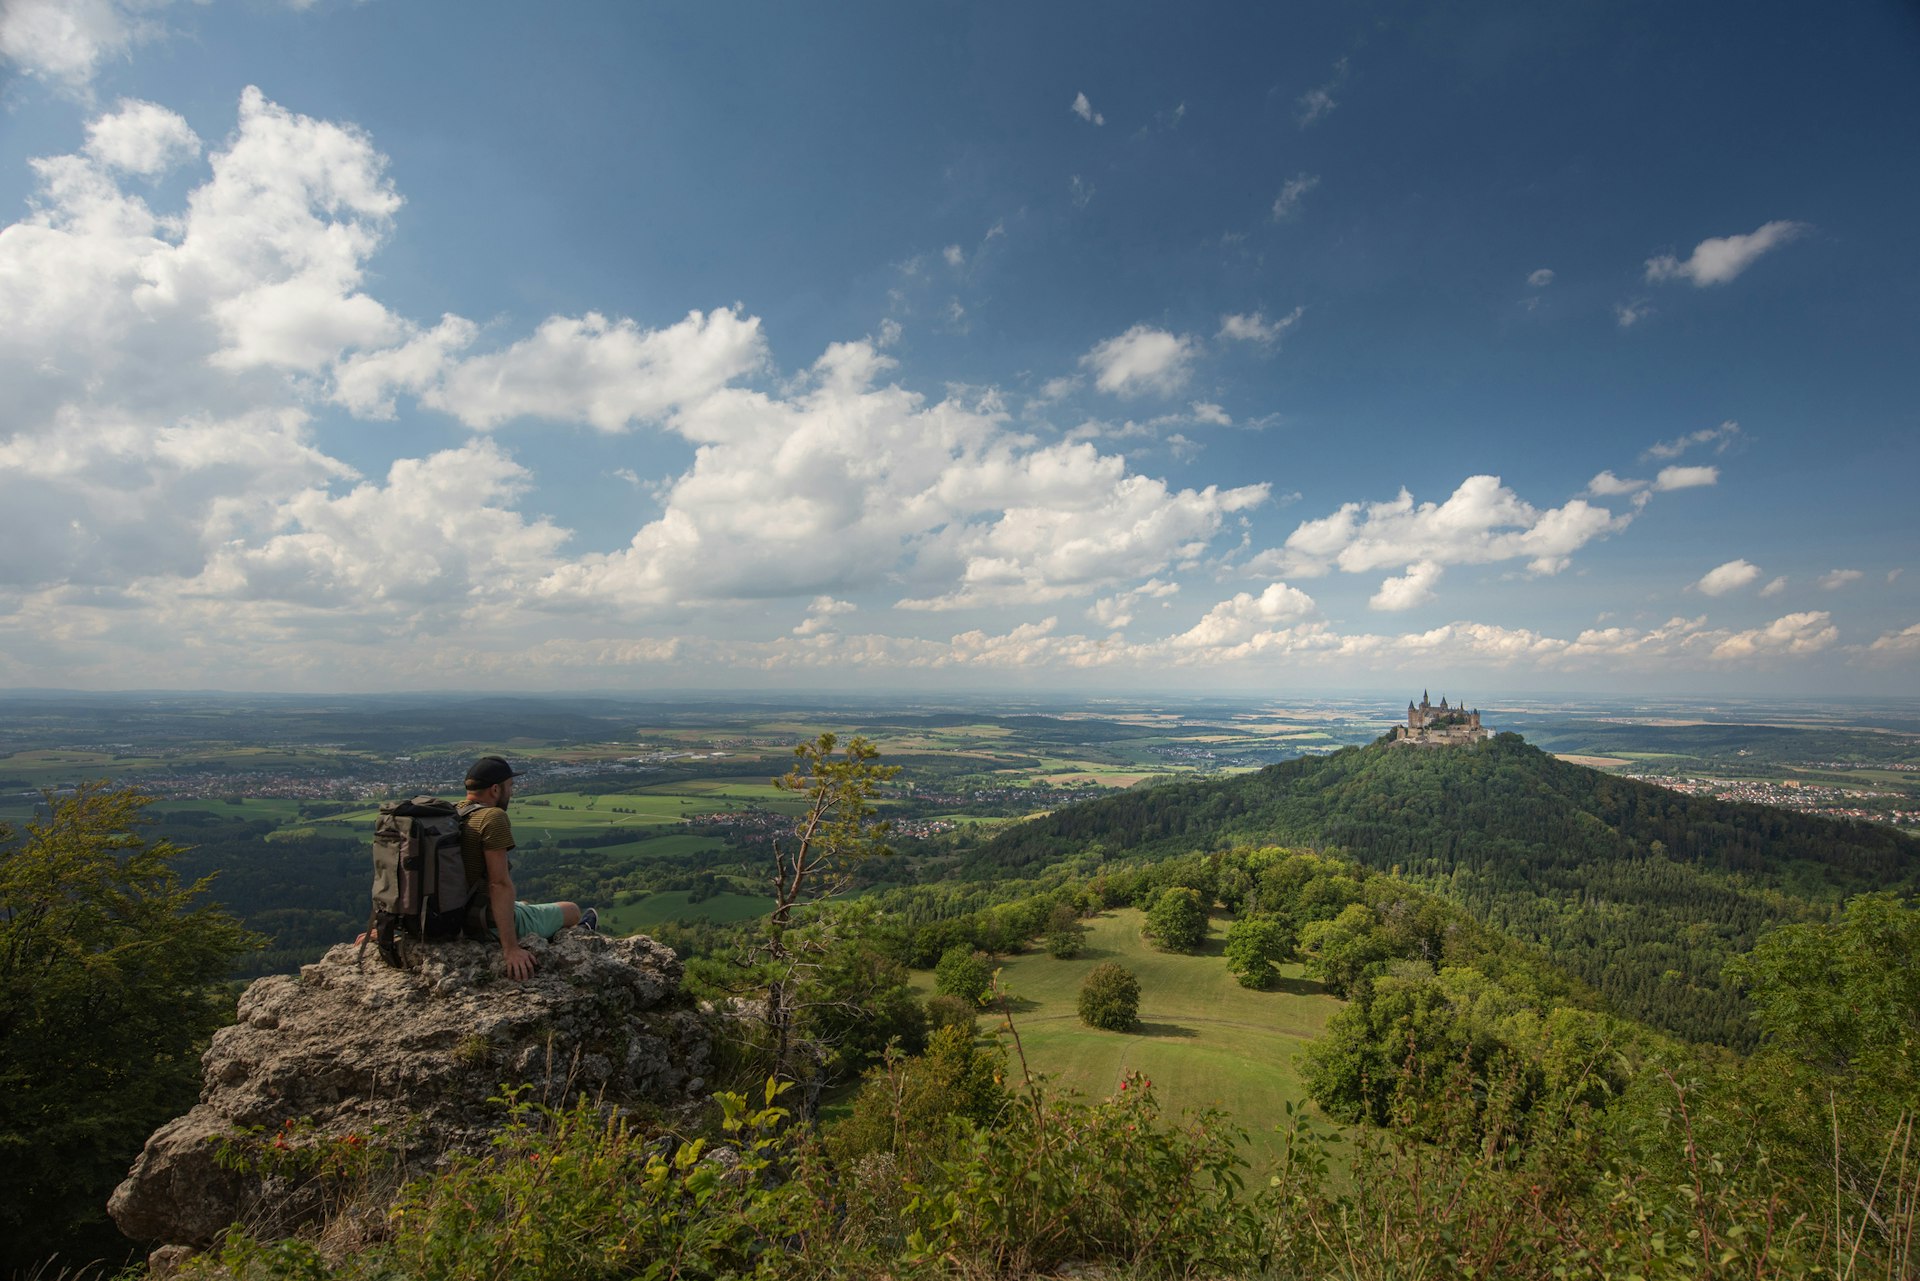 A hiker sits at a viewpoint looking across a green valley towards a castle on a hill